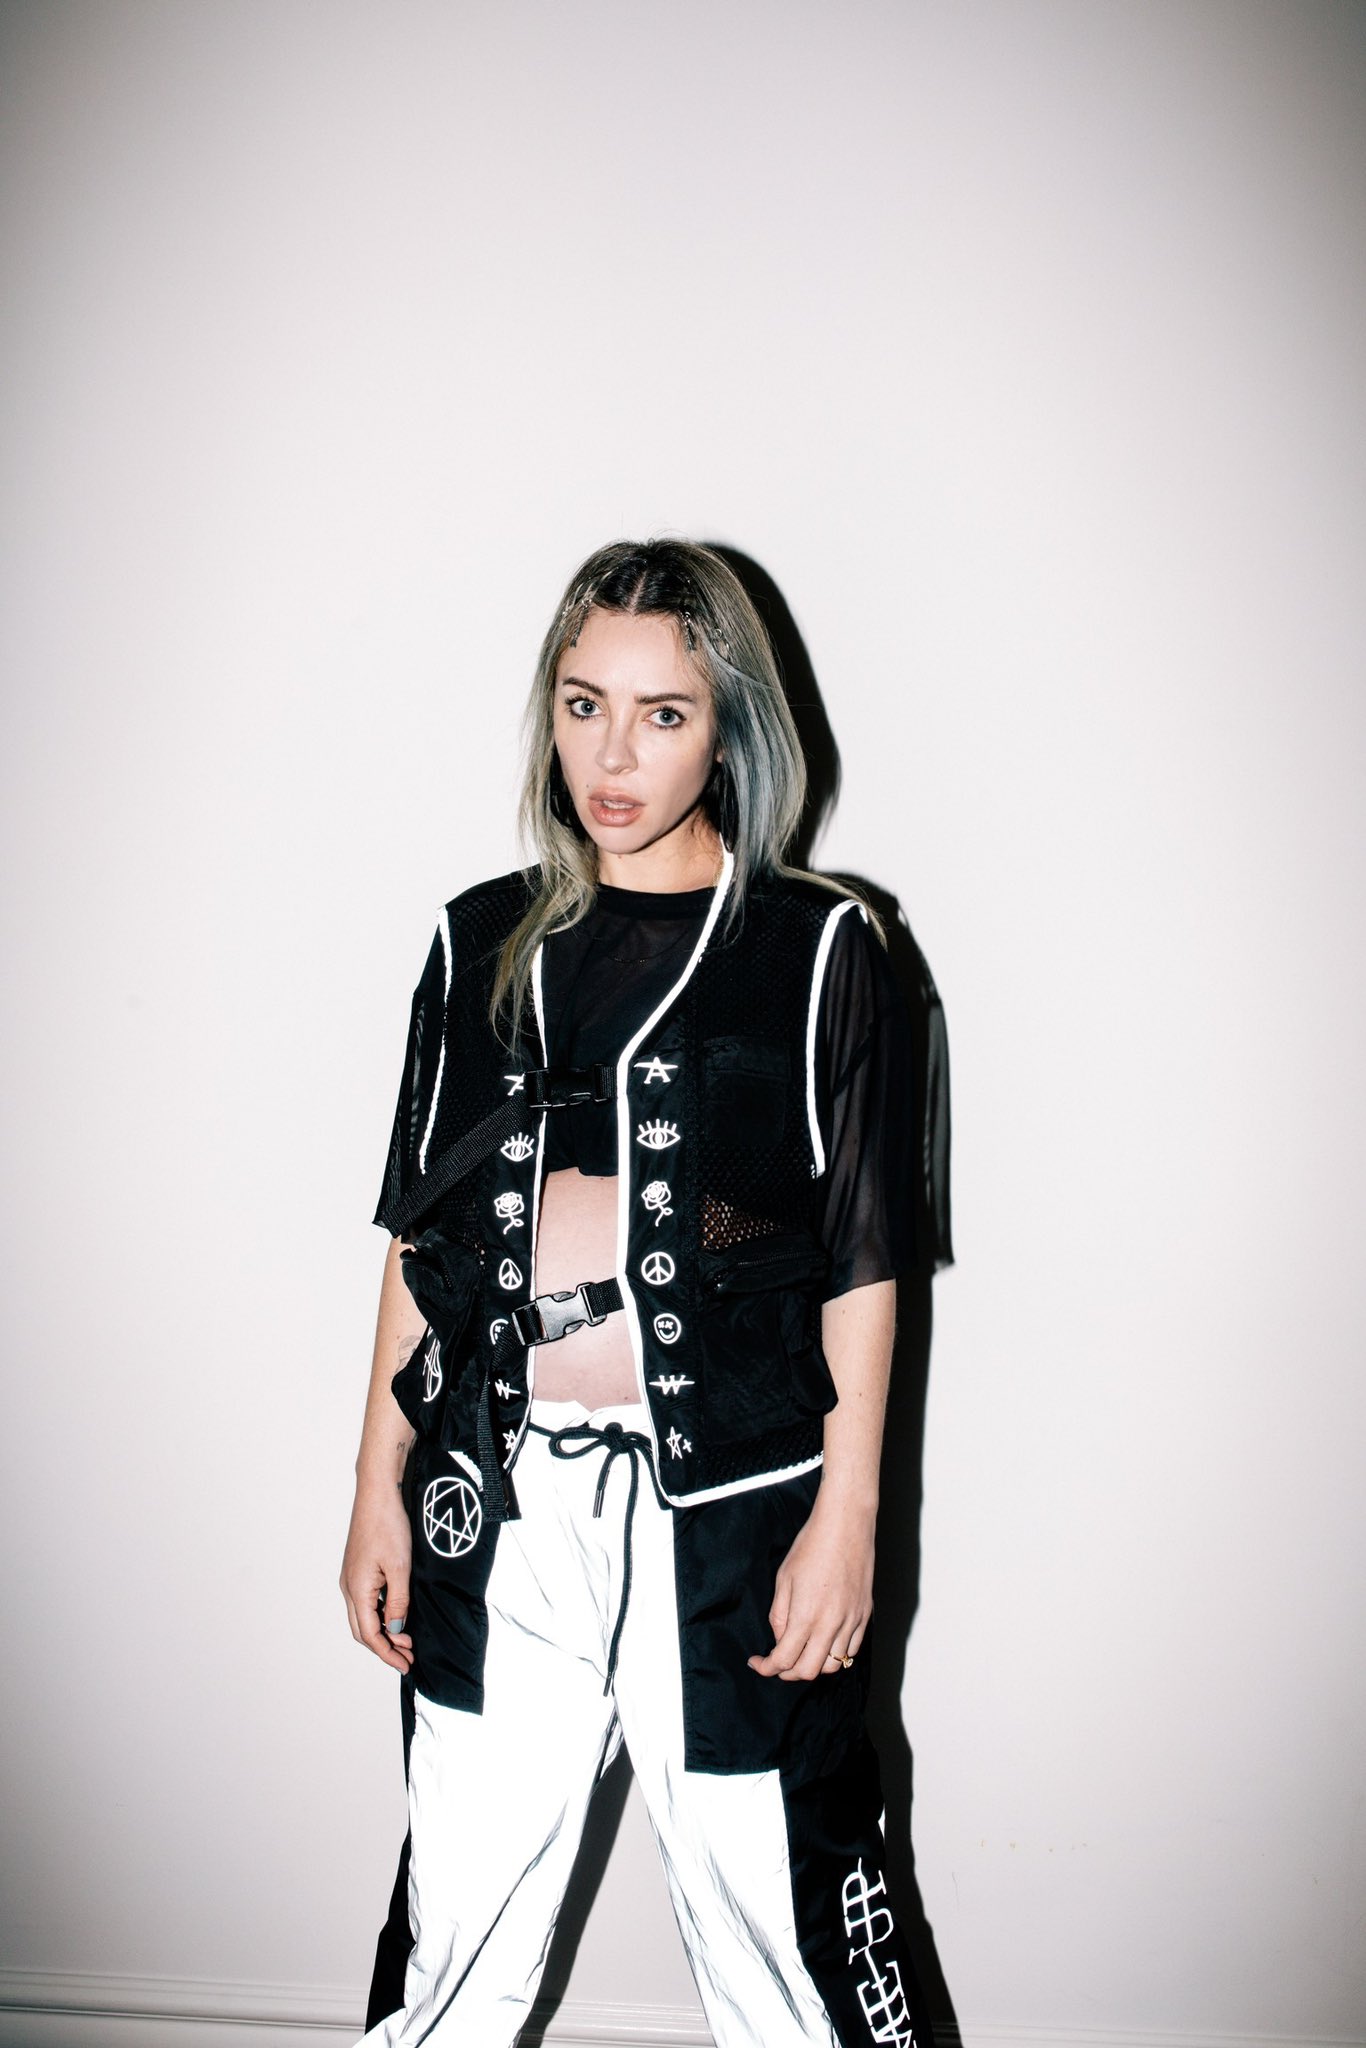 ALISON WONDERLAND on X: So excited to present the Alison